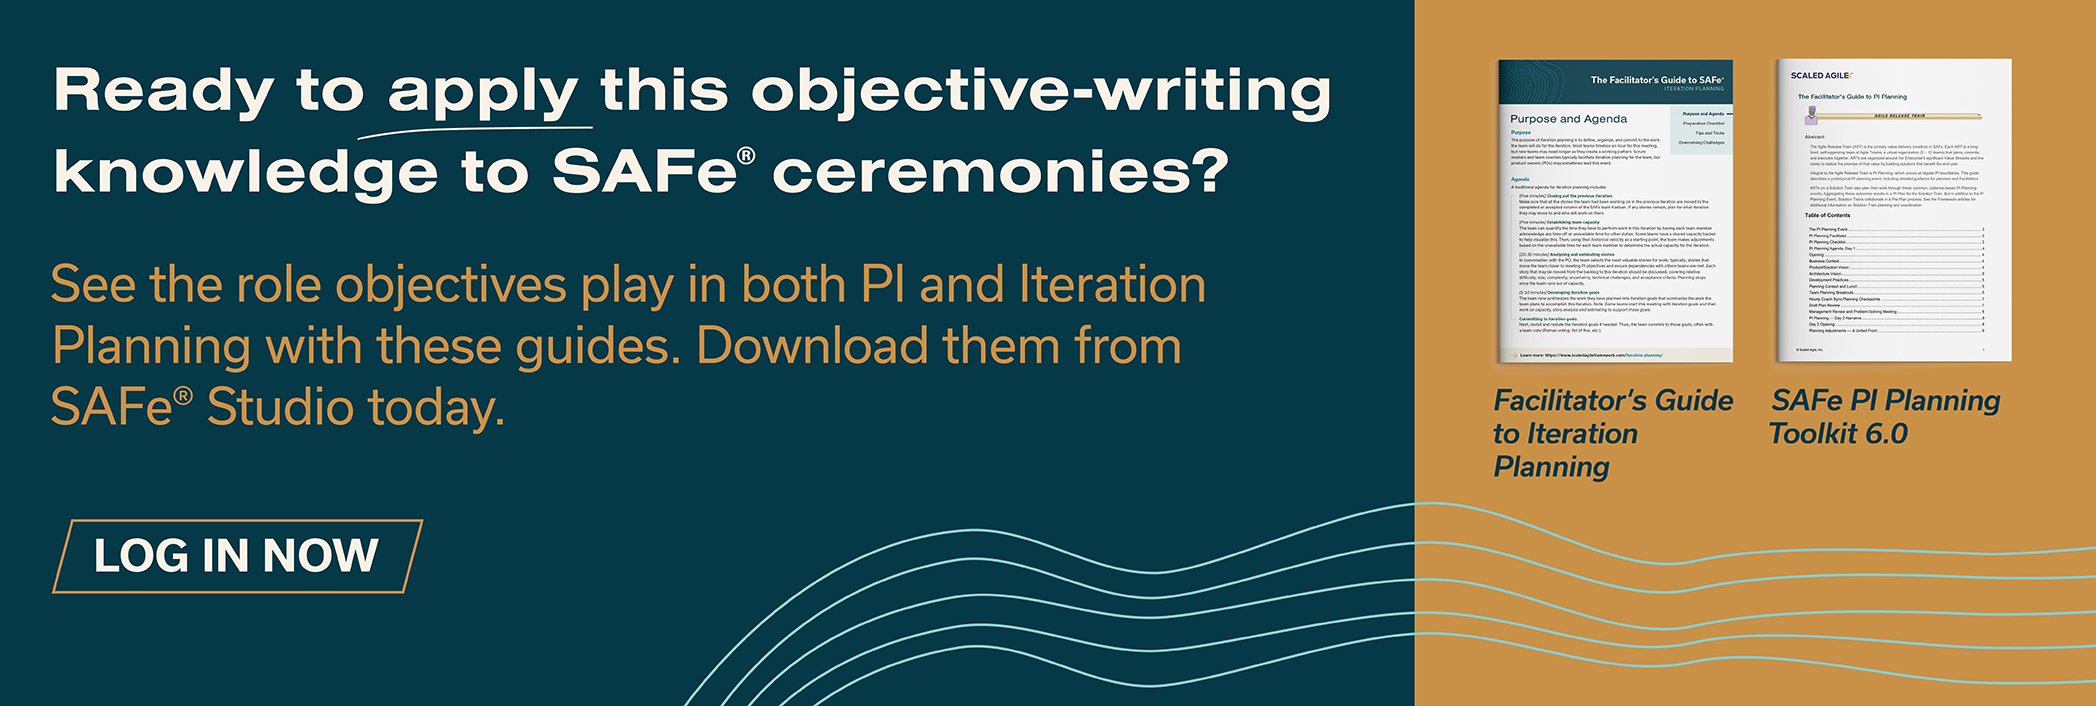 Ready to apply this objective-writing knowledge to SAFe ceremonies? See the role objectives play in both PI and Iteration Planning with these guides. 
- Facilitator's Guide to Iteration Planning 
- SAFe PI Planning Toolkit 6.0
Download them from SAFe Studio today. Log In Now